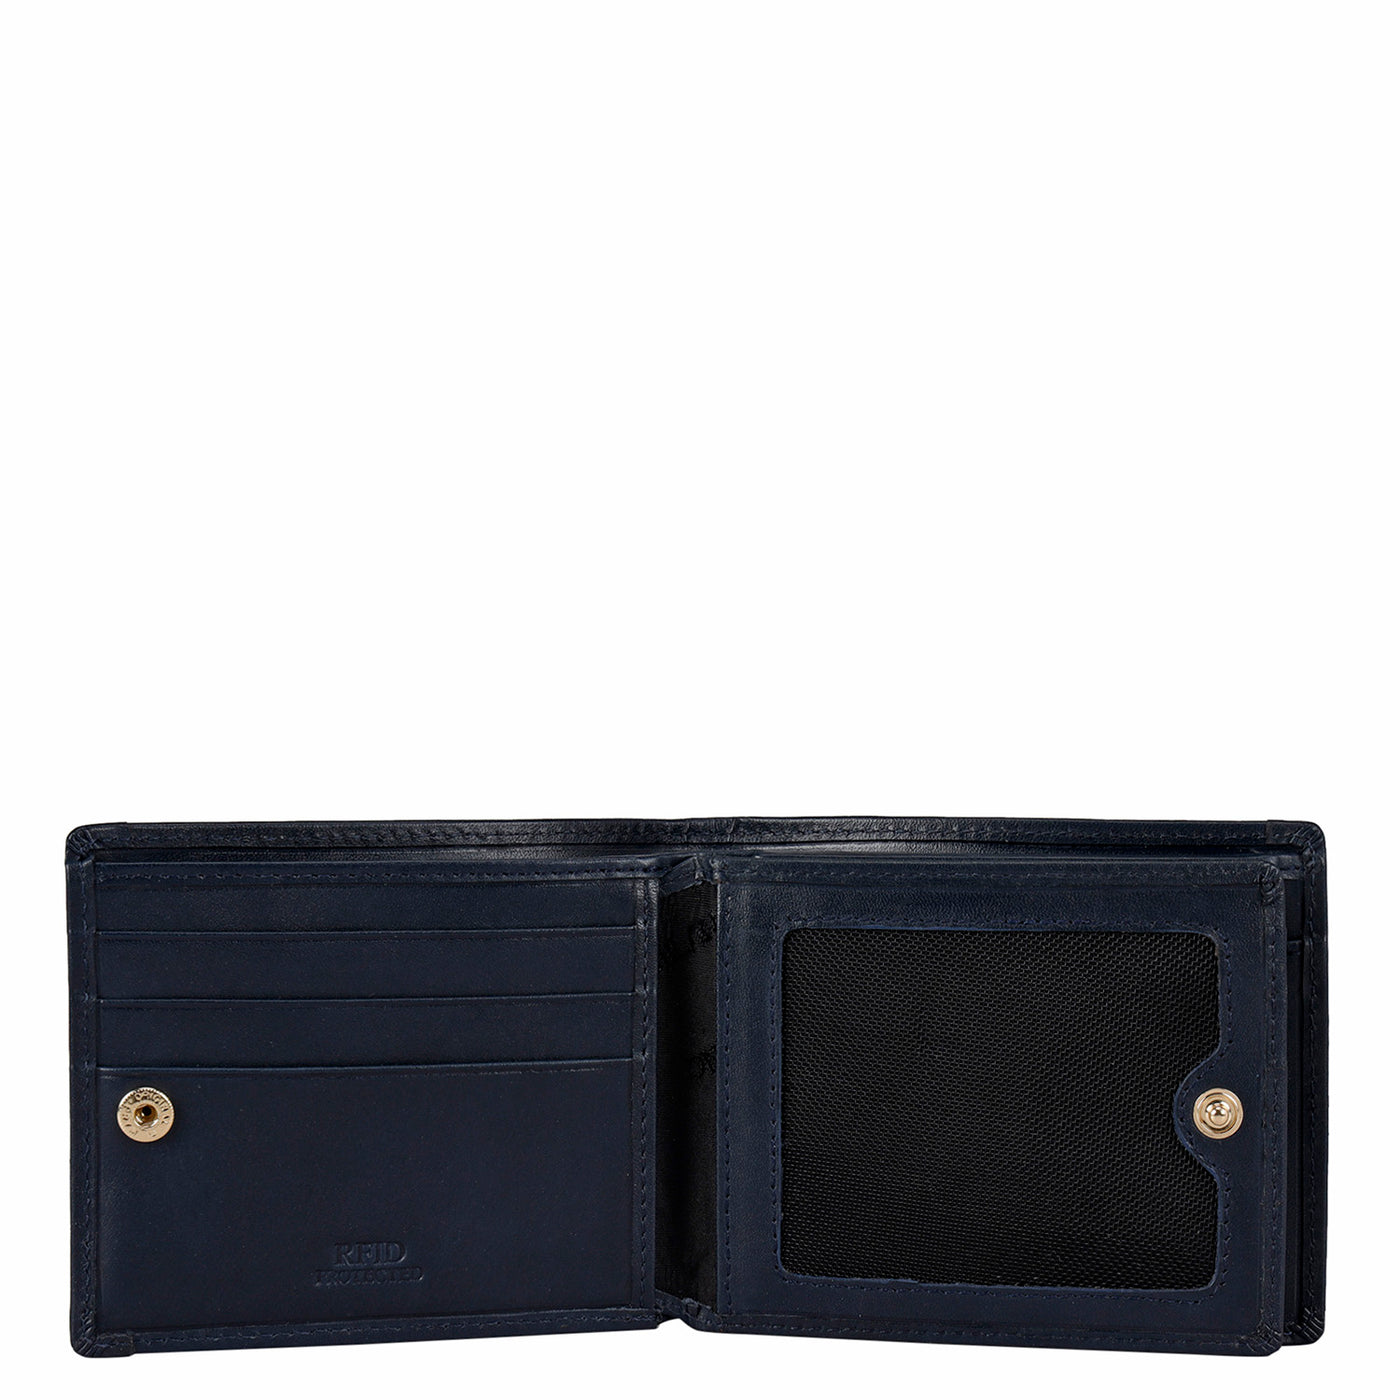 Fish Leather Mens Wallet - Blue